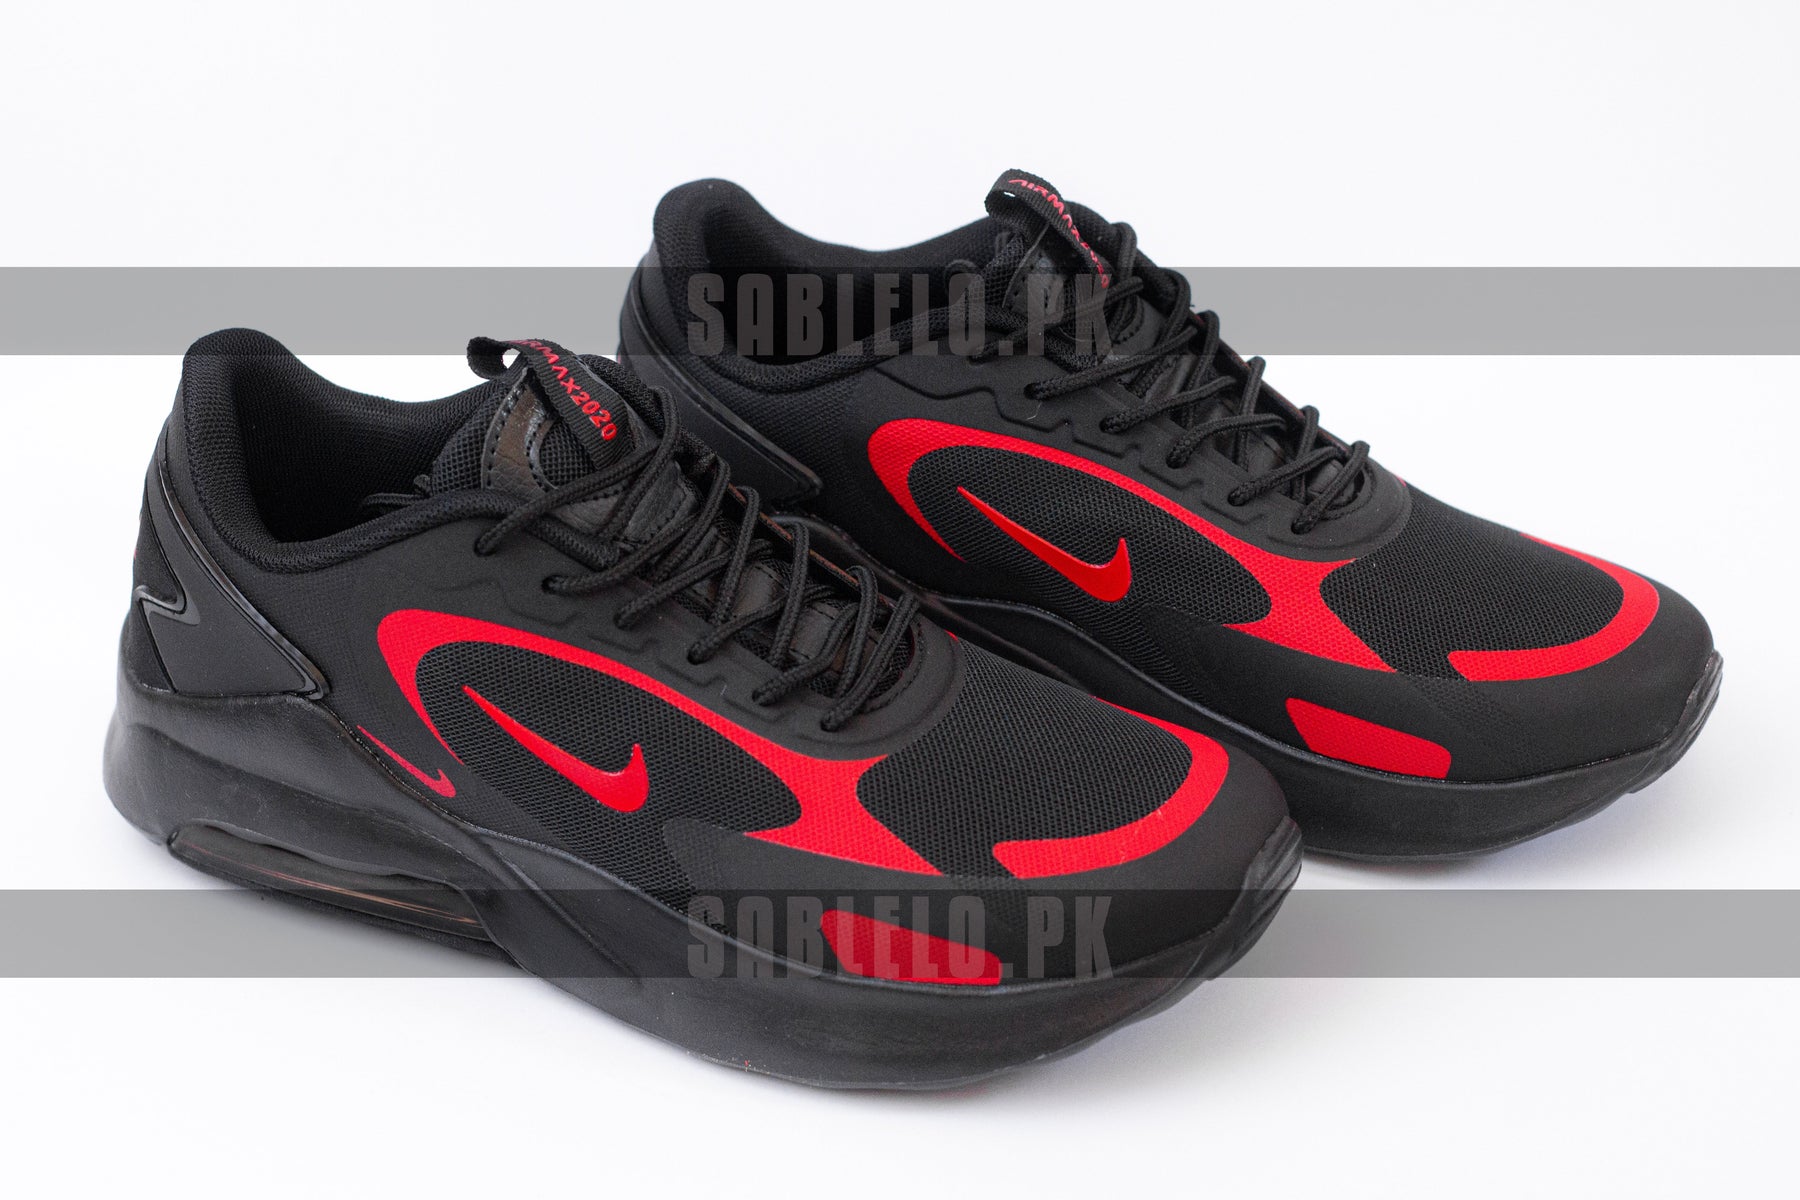 Airmax 2090 Black Red - Premium Shoes from Sablelo.pk - Just Rs.3499! Shop now at Sablelo.pk